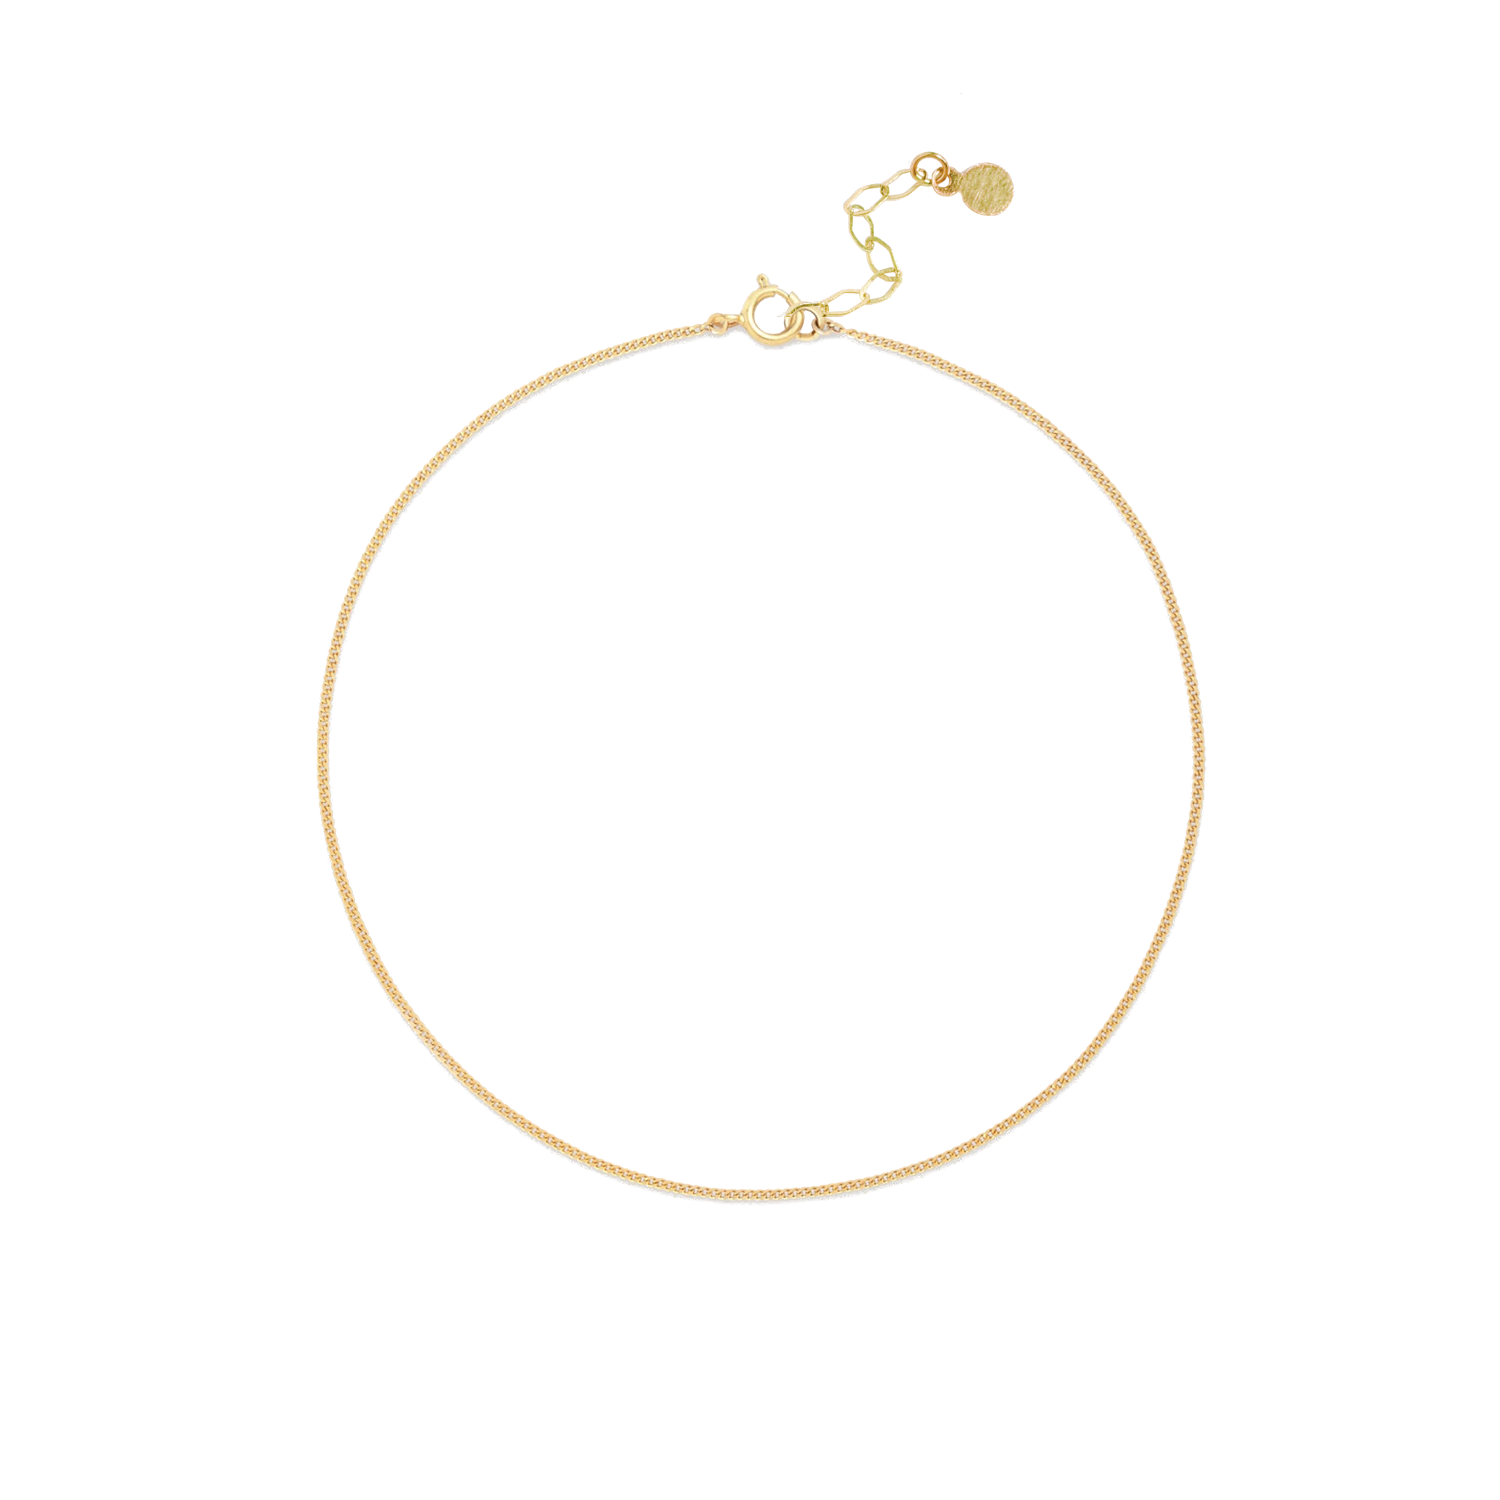 Curb Chain Anklet - 14k Gold or Silver - The Smart Minimalist